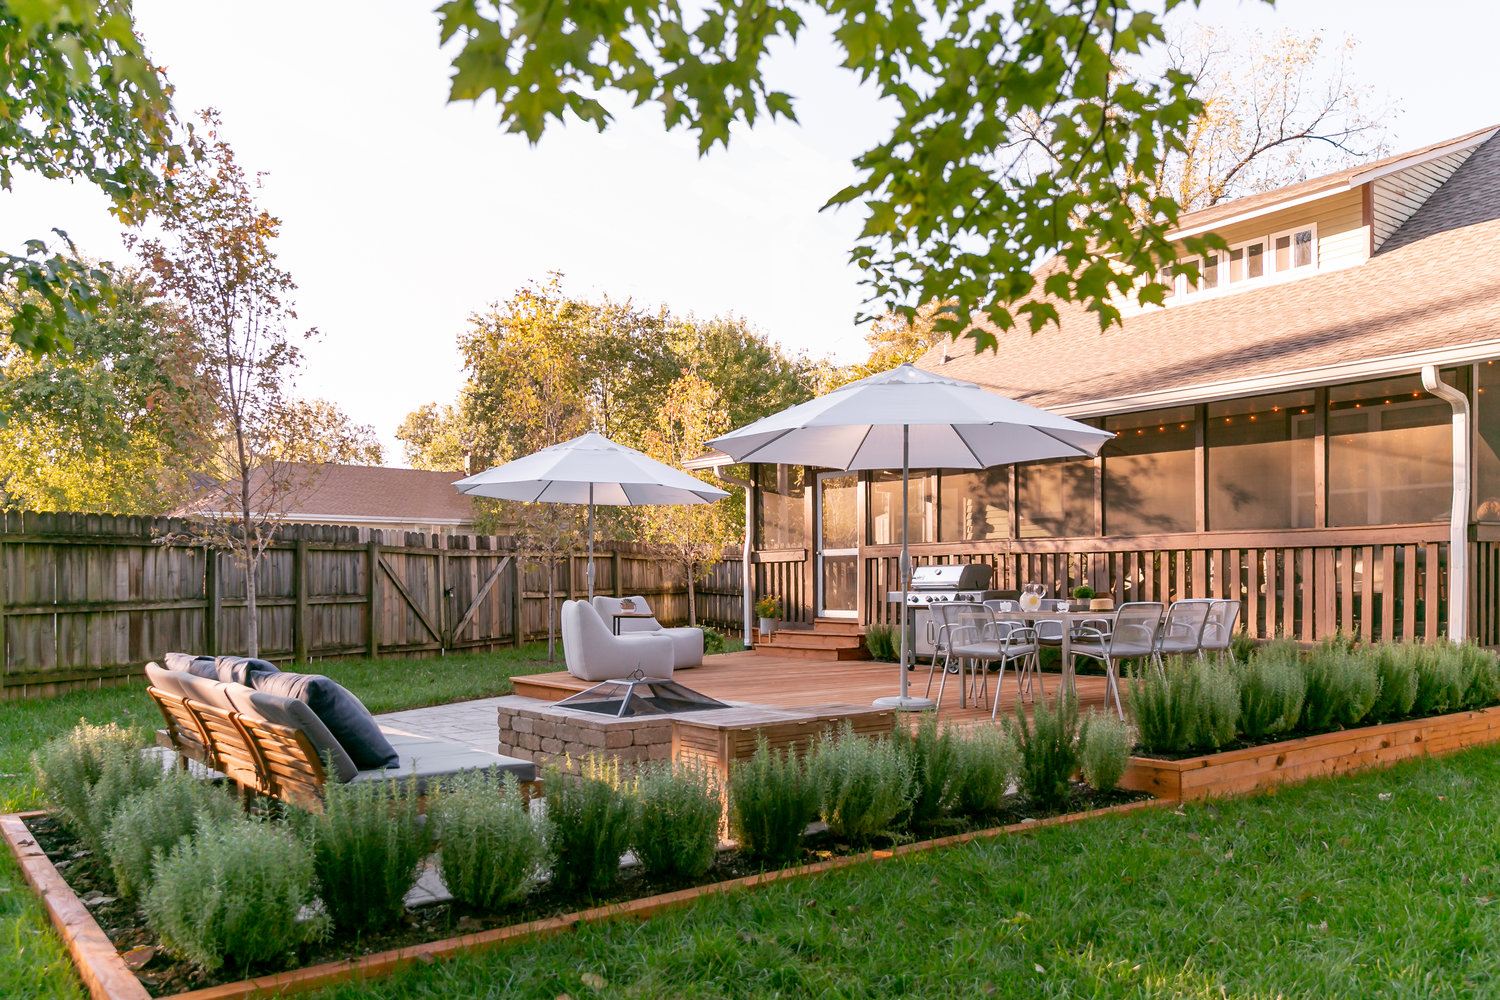 Factors to Consider When Planning Your Backyard Design